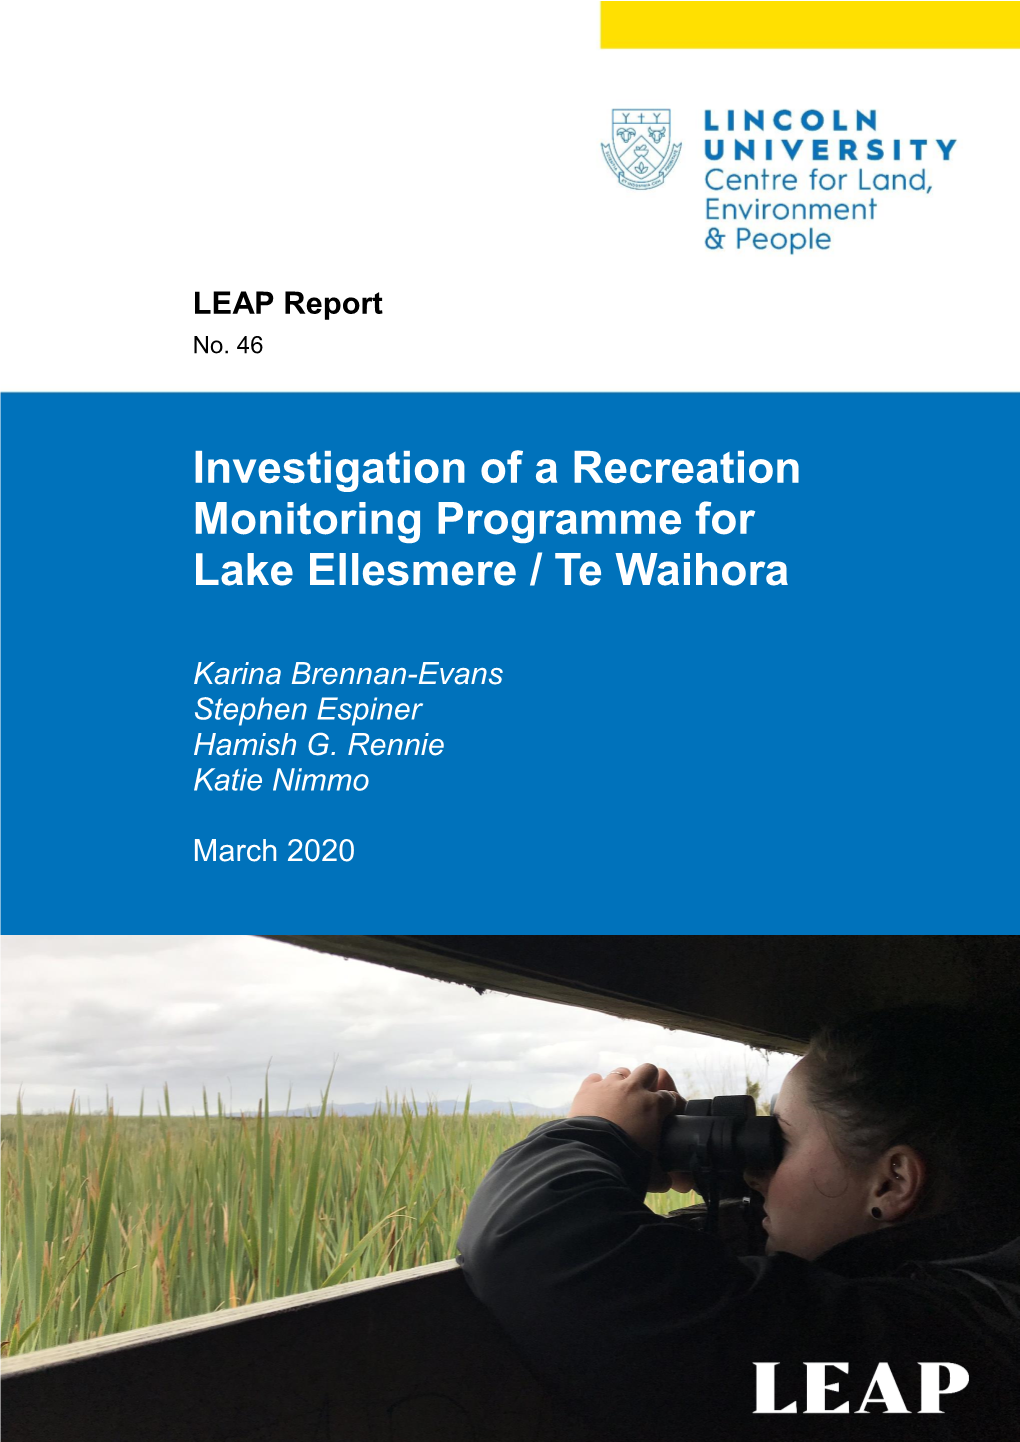 Investigation of a Recreation Monitoring Programme for Lake Ellesmere / Te Waihora